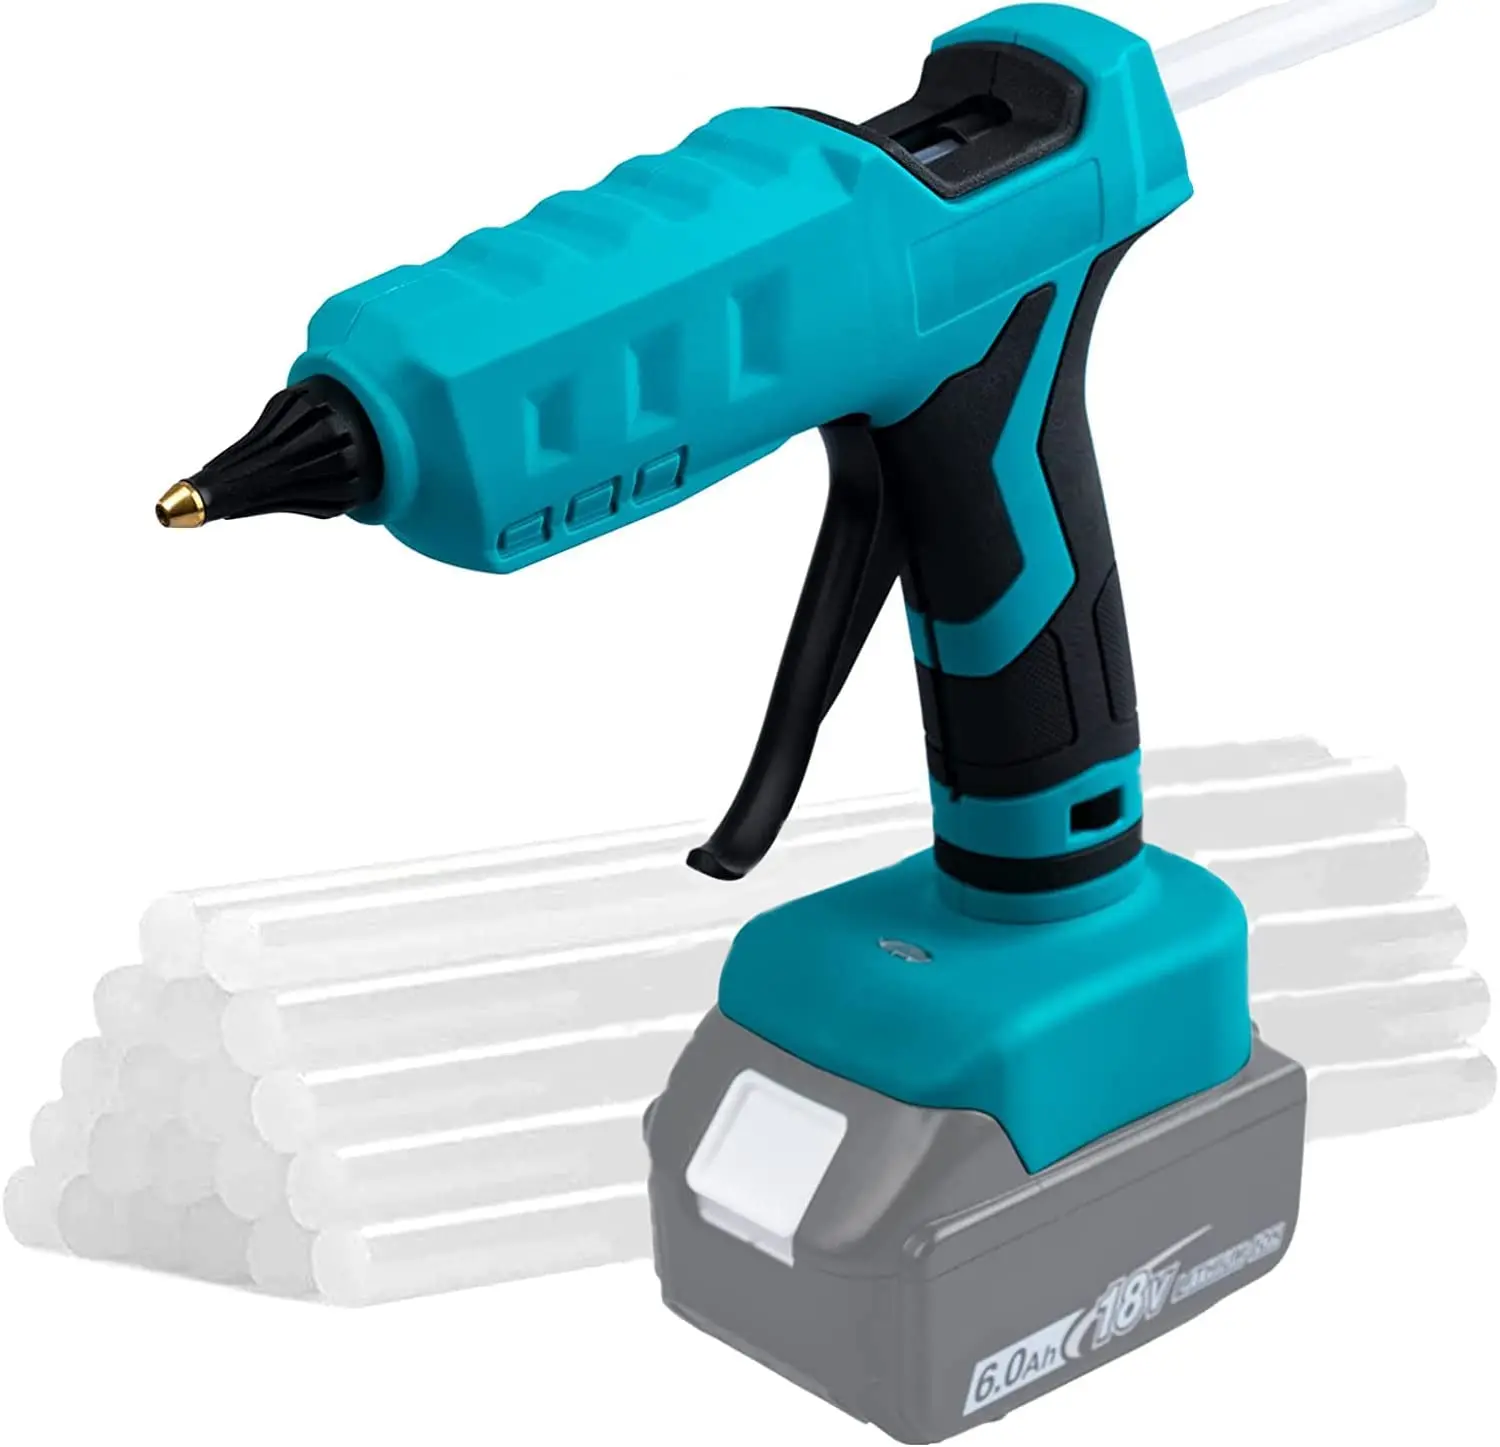 100W Cordless Hot Glue Gun for Makita 18V BL1830 BL1840 LXT Battery use 11mm Glue Sticks DIY Electric Heat Repair Tool Christmas 25 500pcs 18650 21700 li ion battery insulation gasket 1s 8s pack cell barley adhesive paper insulate tool glue electrode pads